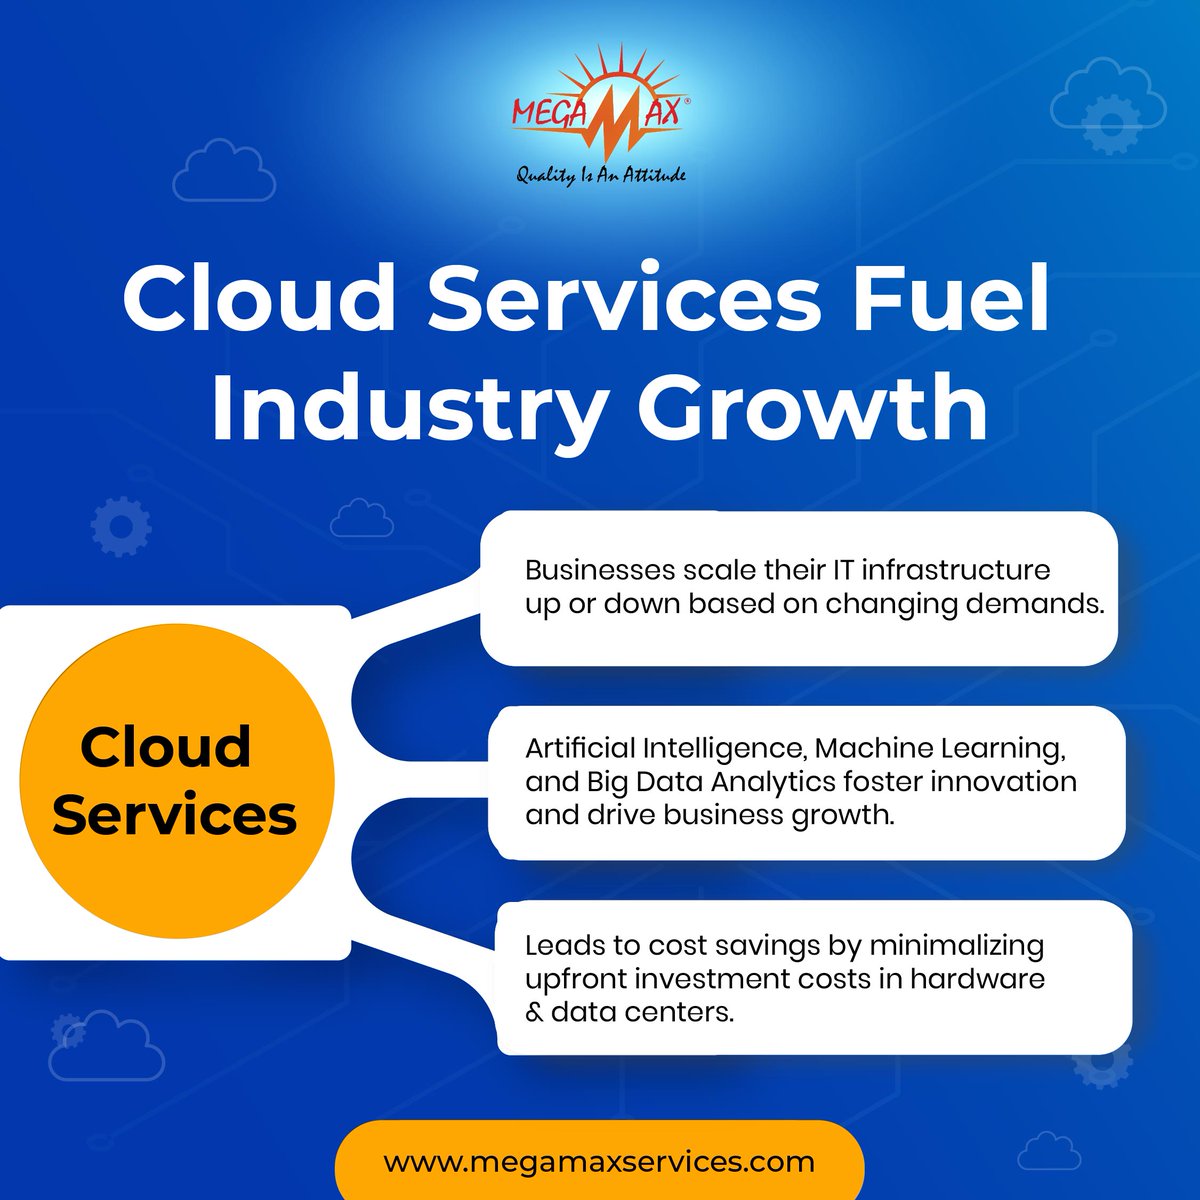 Cloud services offer on-demand scalability, fueling innovation with cutting-edge tools like AI and Big Data

megamaxservices.com

#megamaxservices #itservices #cloudtech #itprivacy  #itsolutions #CloudBased #webdesignanddevelopment #itsolutions #empowerbusiness #investsmarter